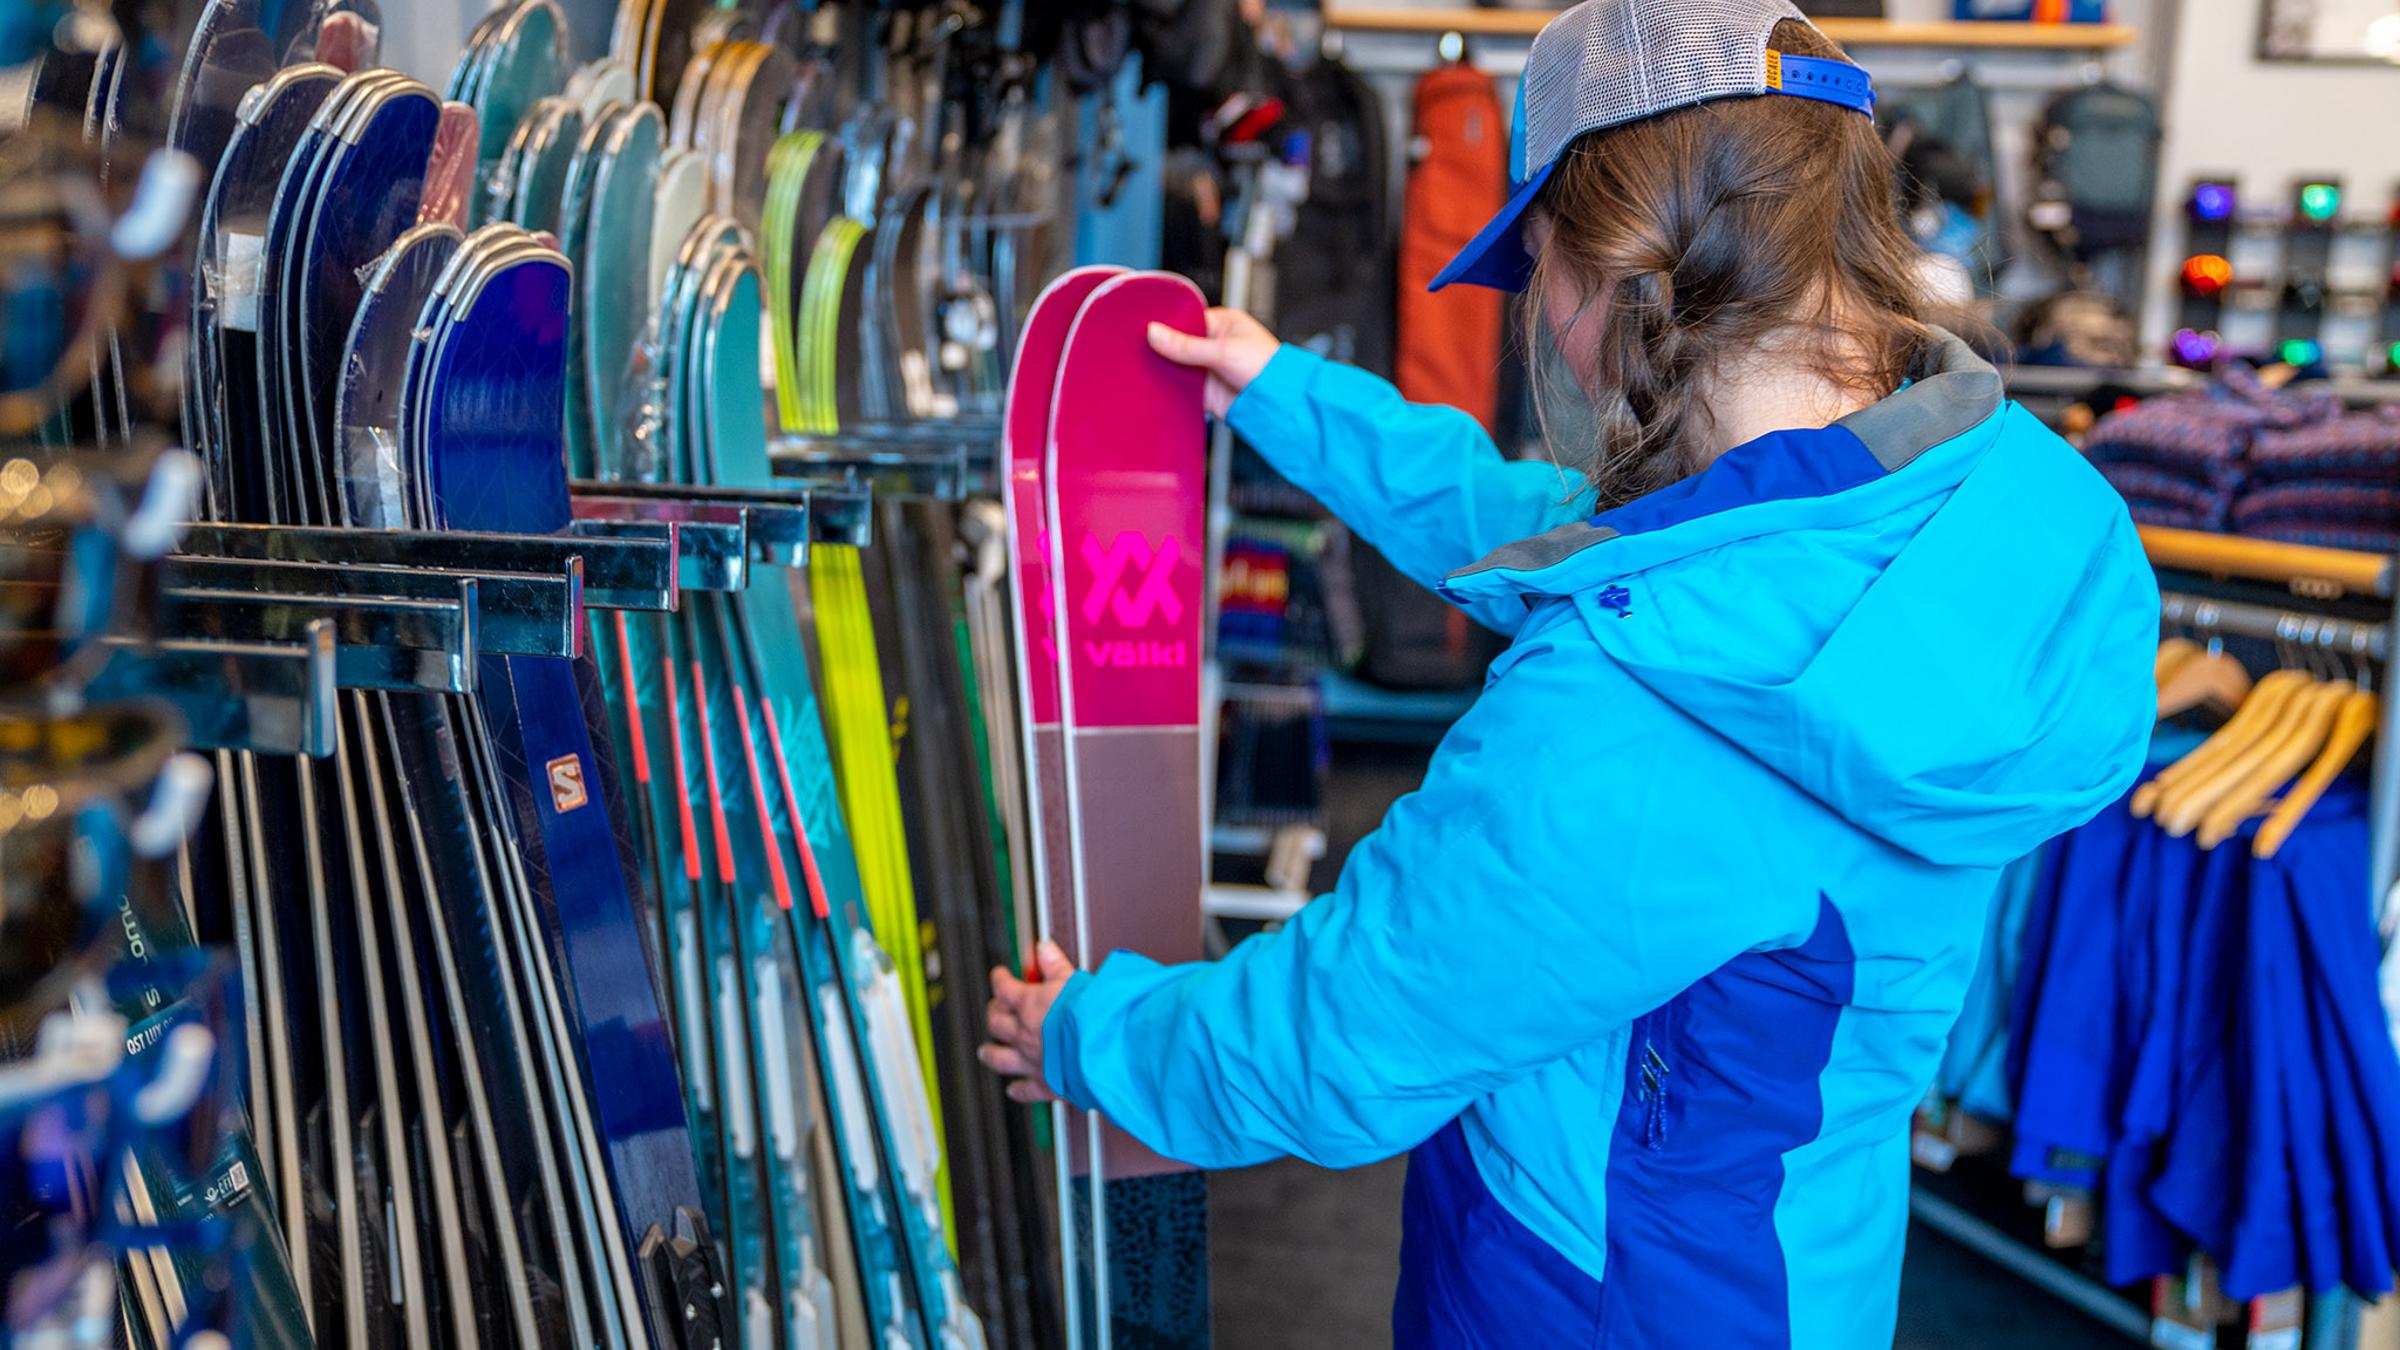 Women being fitted for rental skis in Winter Park Village